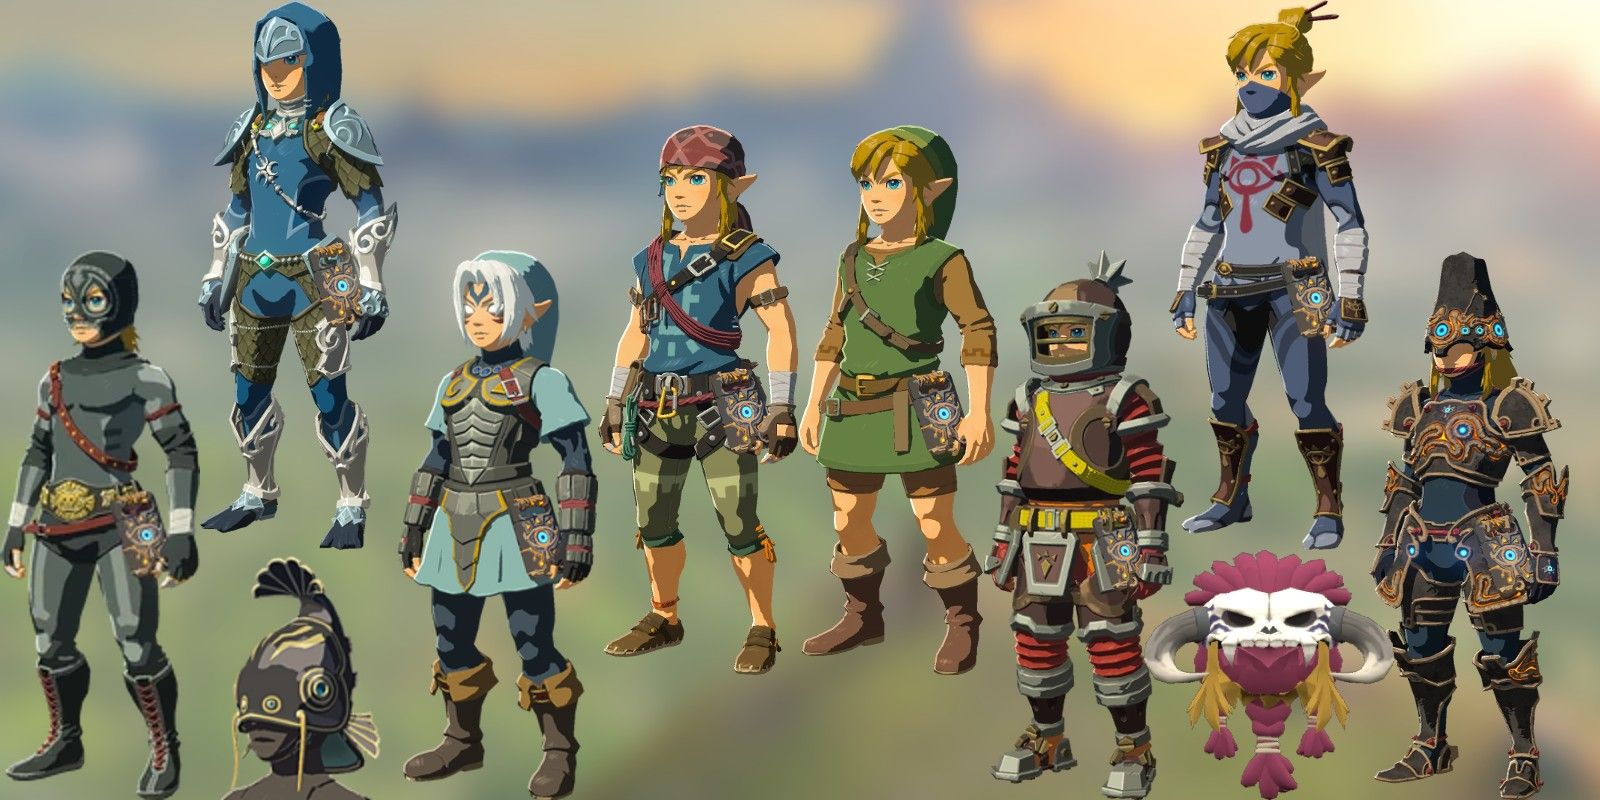 Top 10 Best Armor Sets for the Legend of Zelda Breath of the Wild